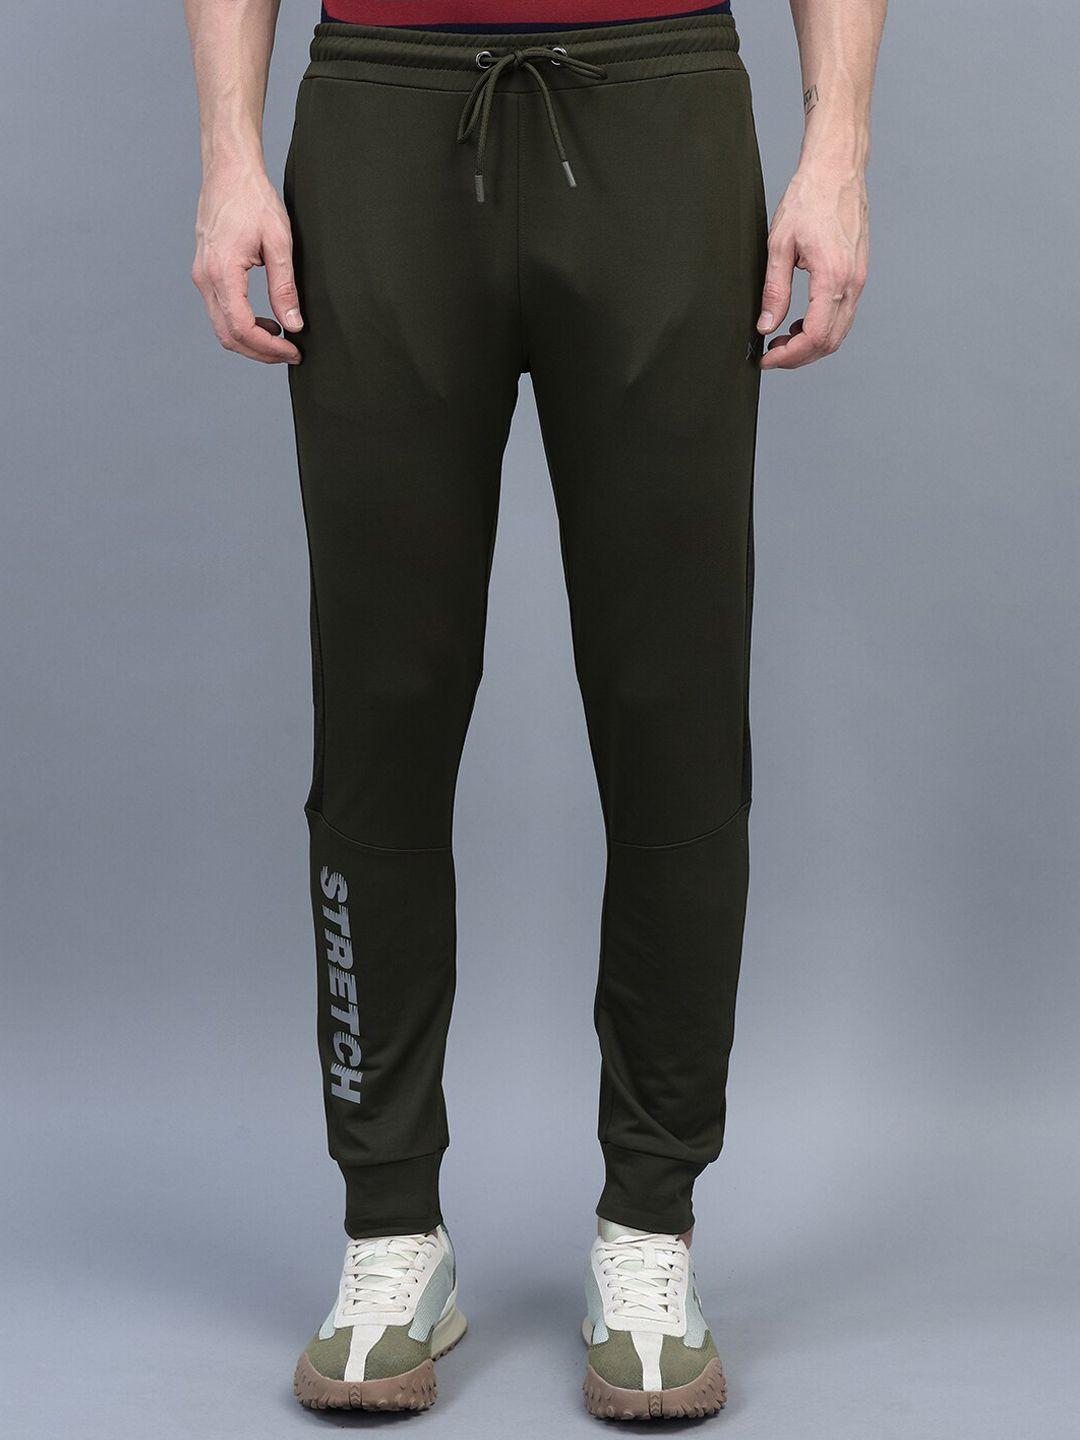 force-nxt-men-mid-rise-joggers